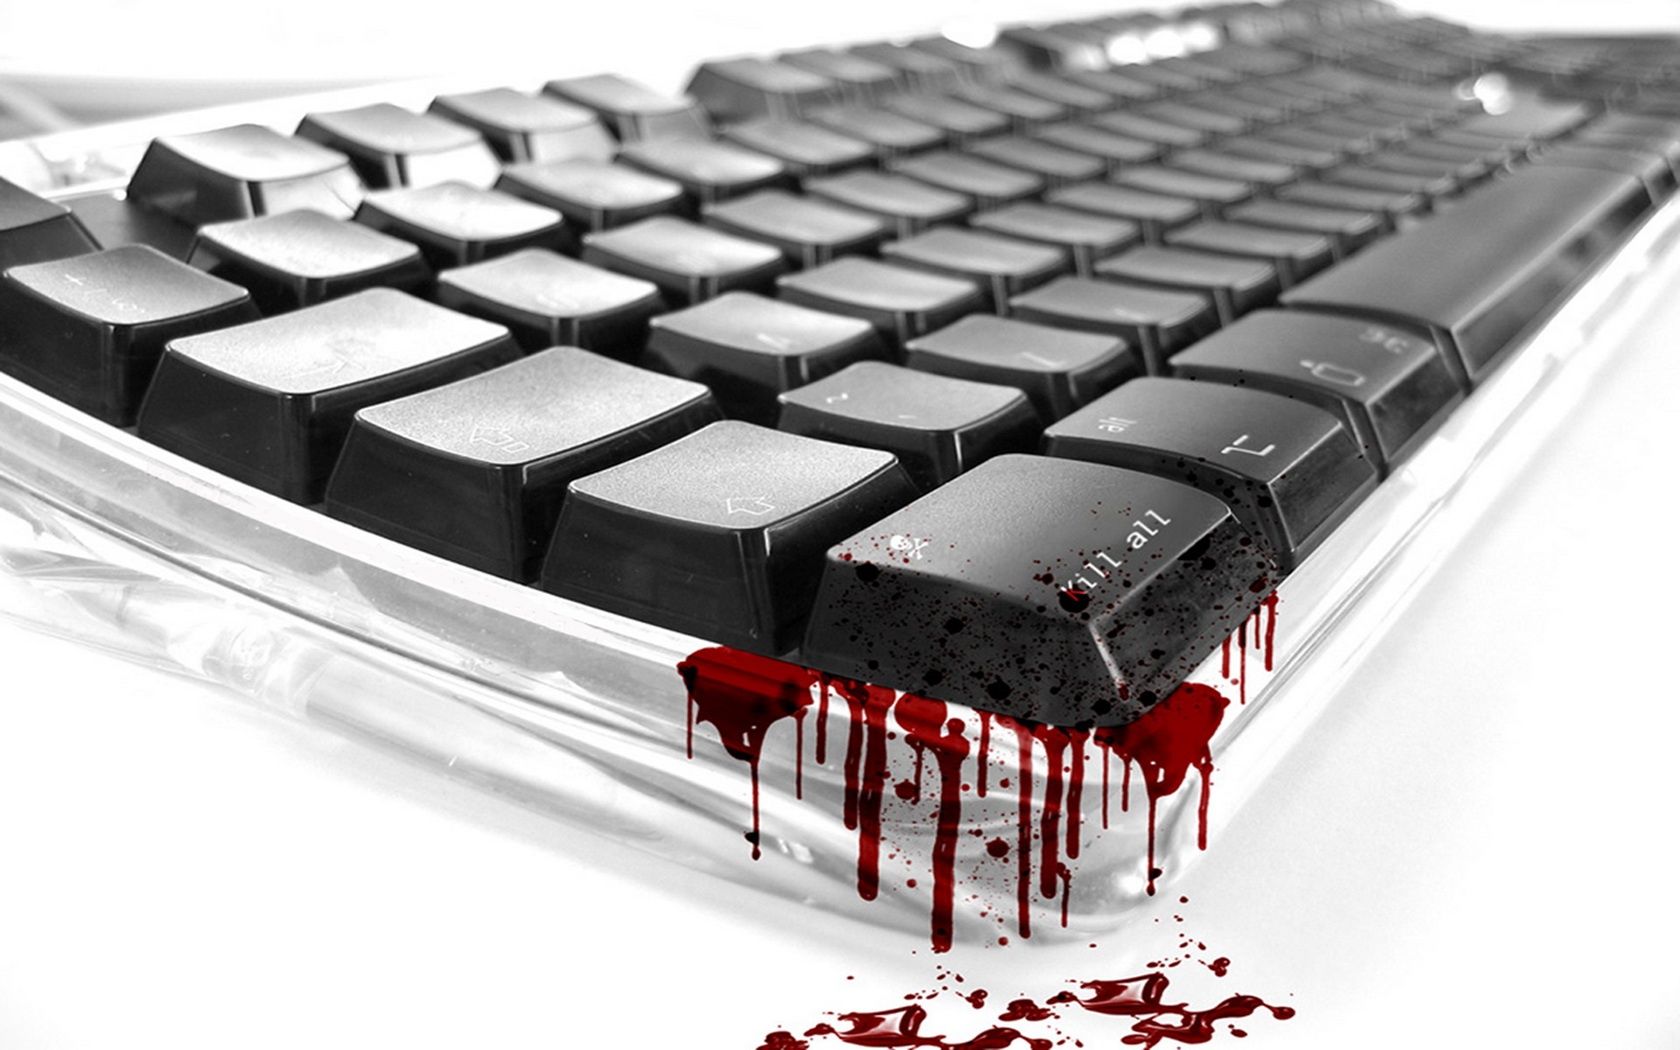 Bloody Ctrl wallpapers and images - wallpapers, pictures, photos